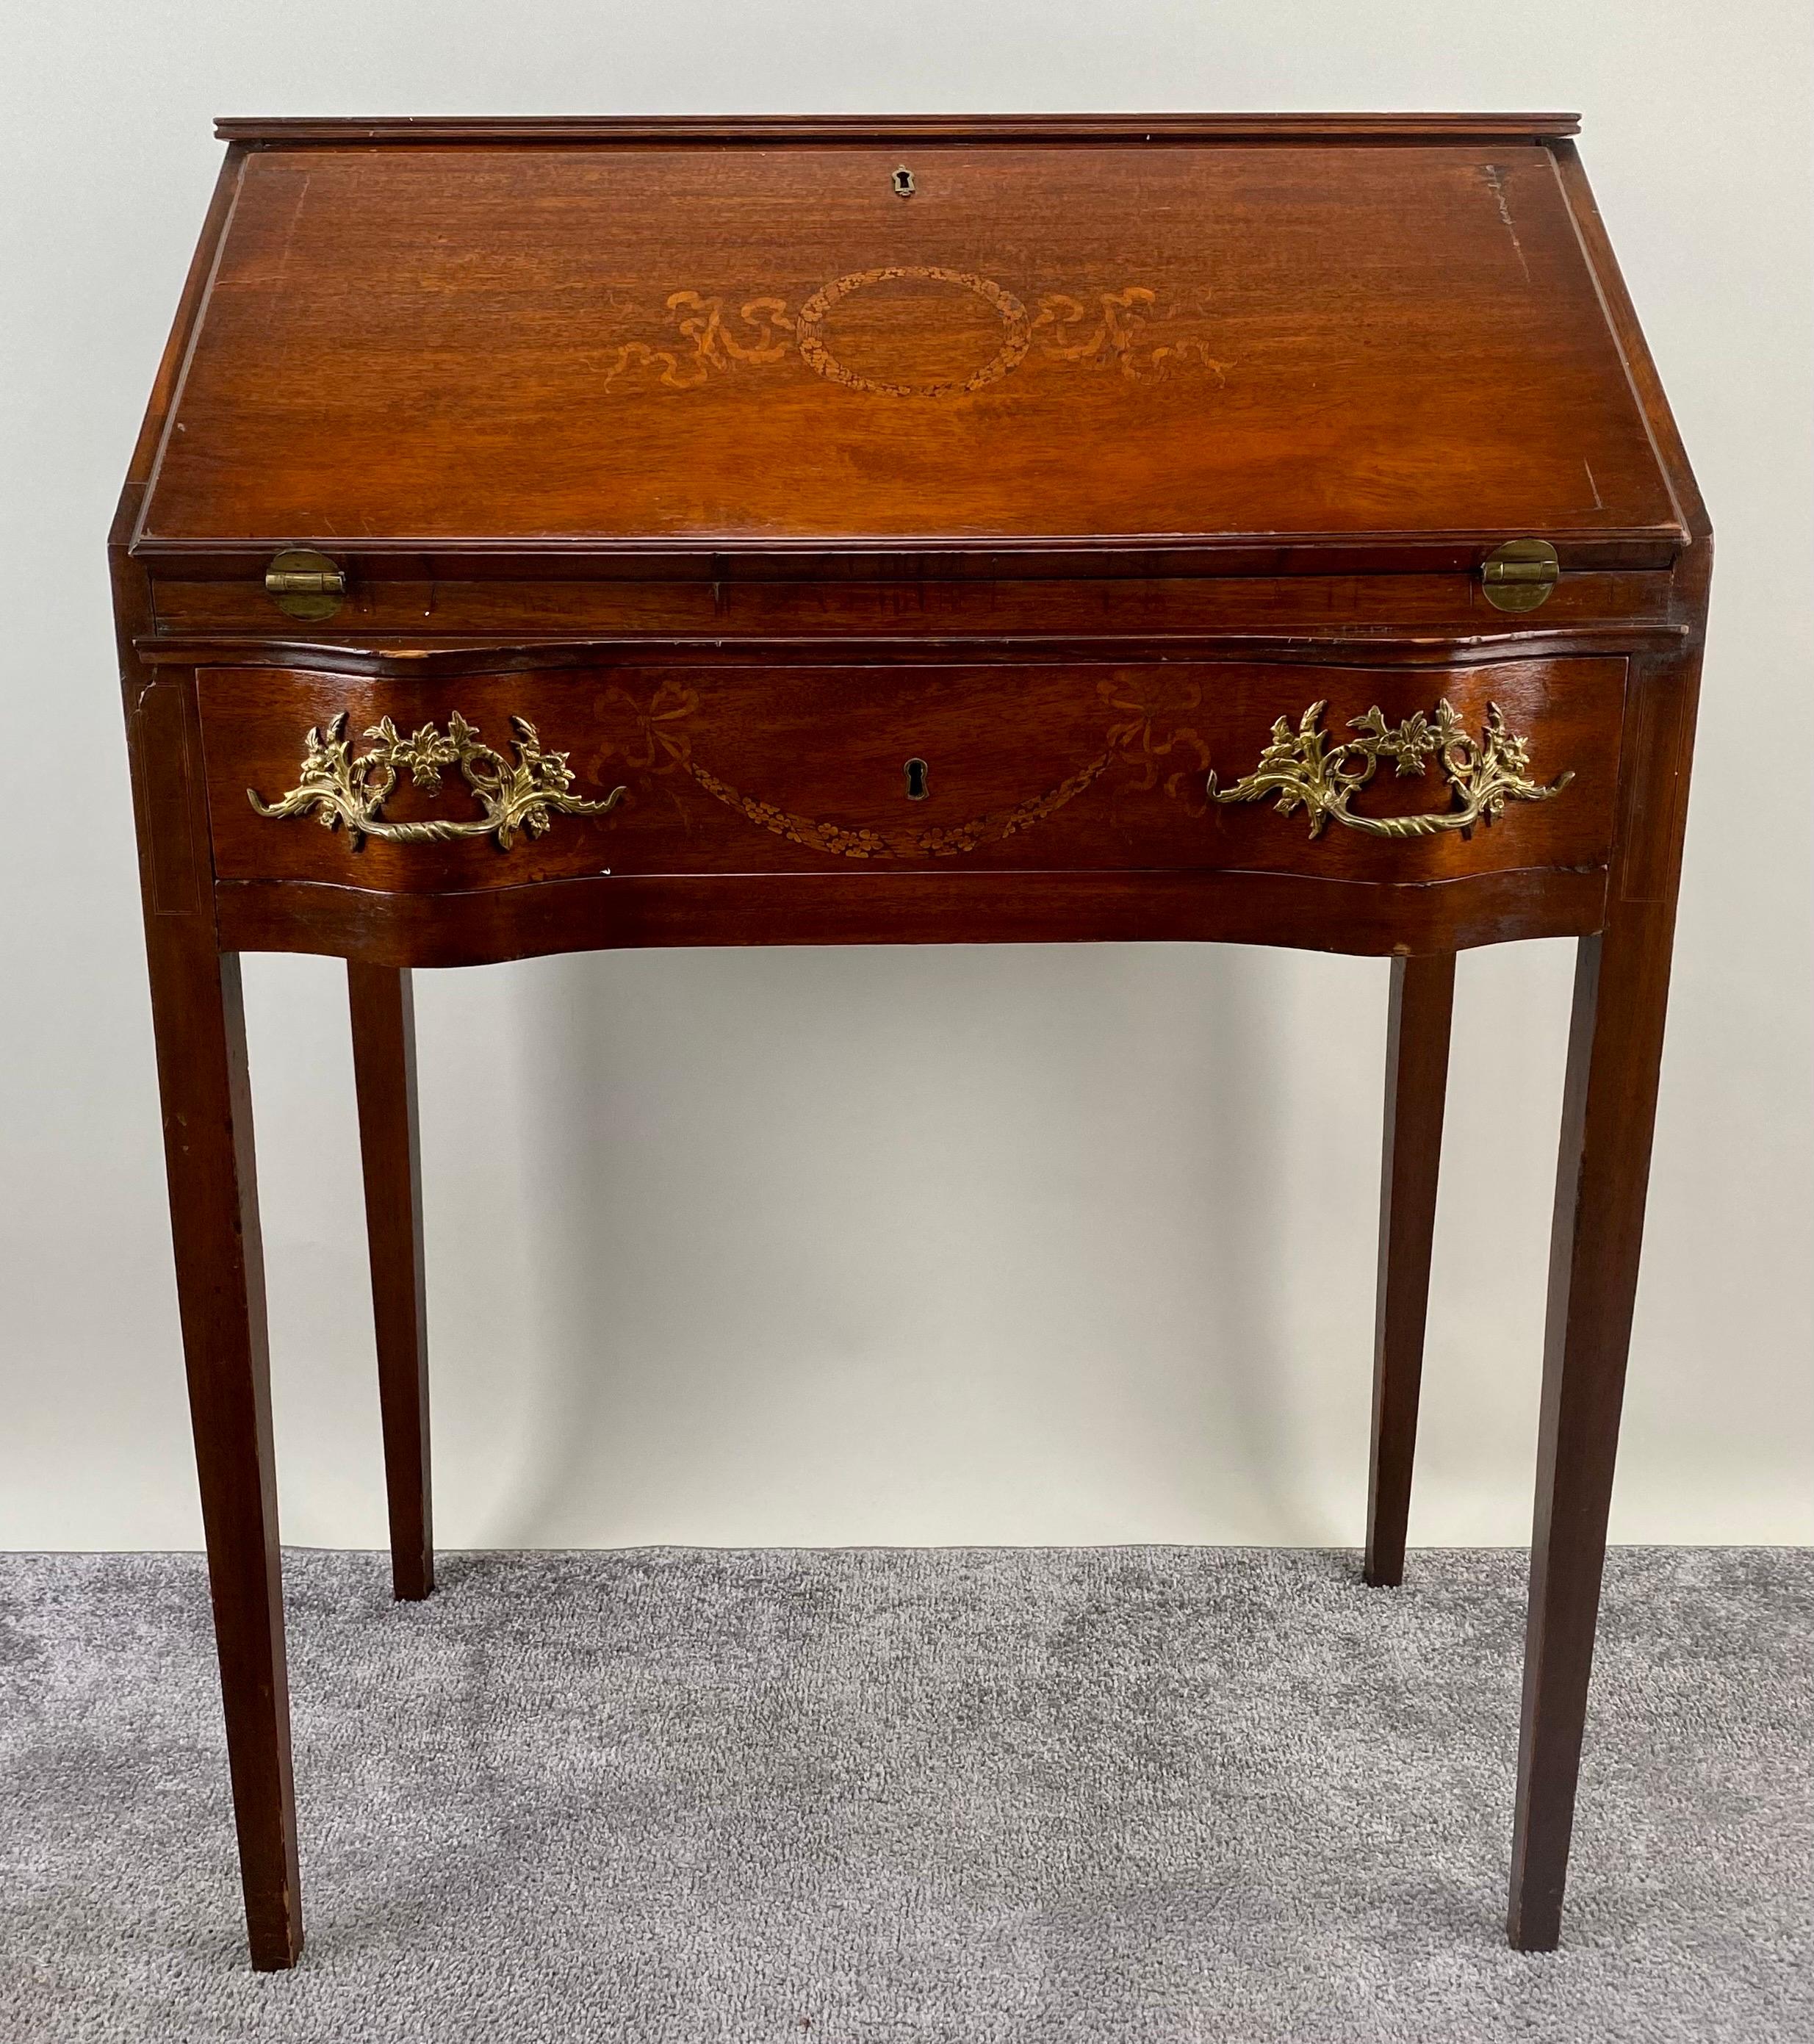 Antique English Edwardian Mahogany Inlaid Secretary Slant Front Desk & Chair  In Good Condition For Sale In Plainview, NY